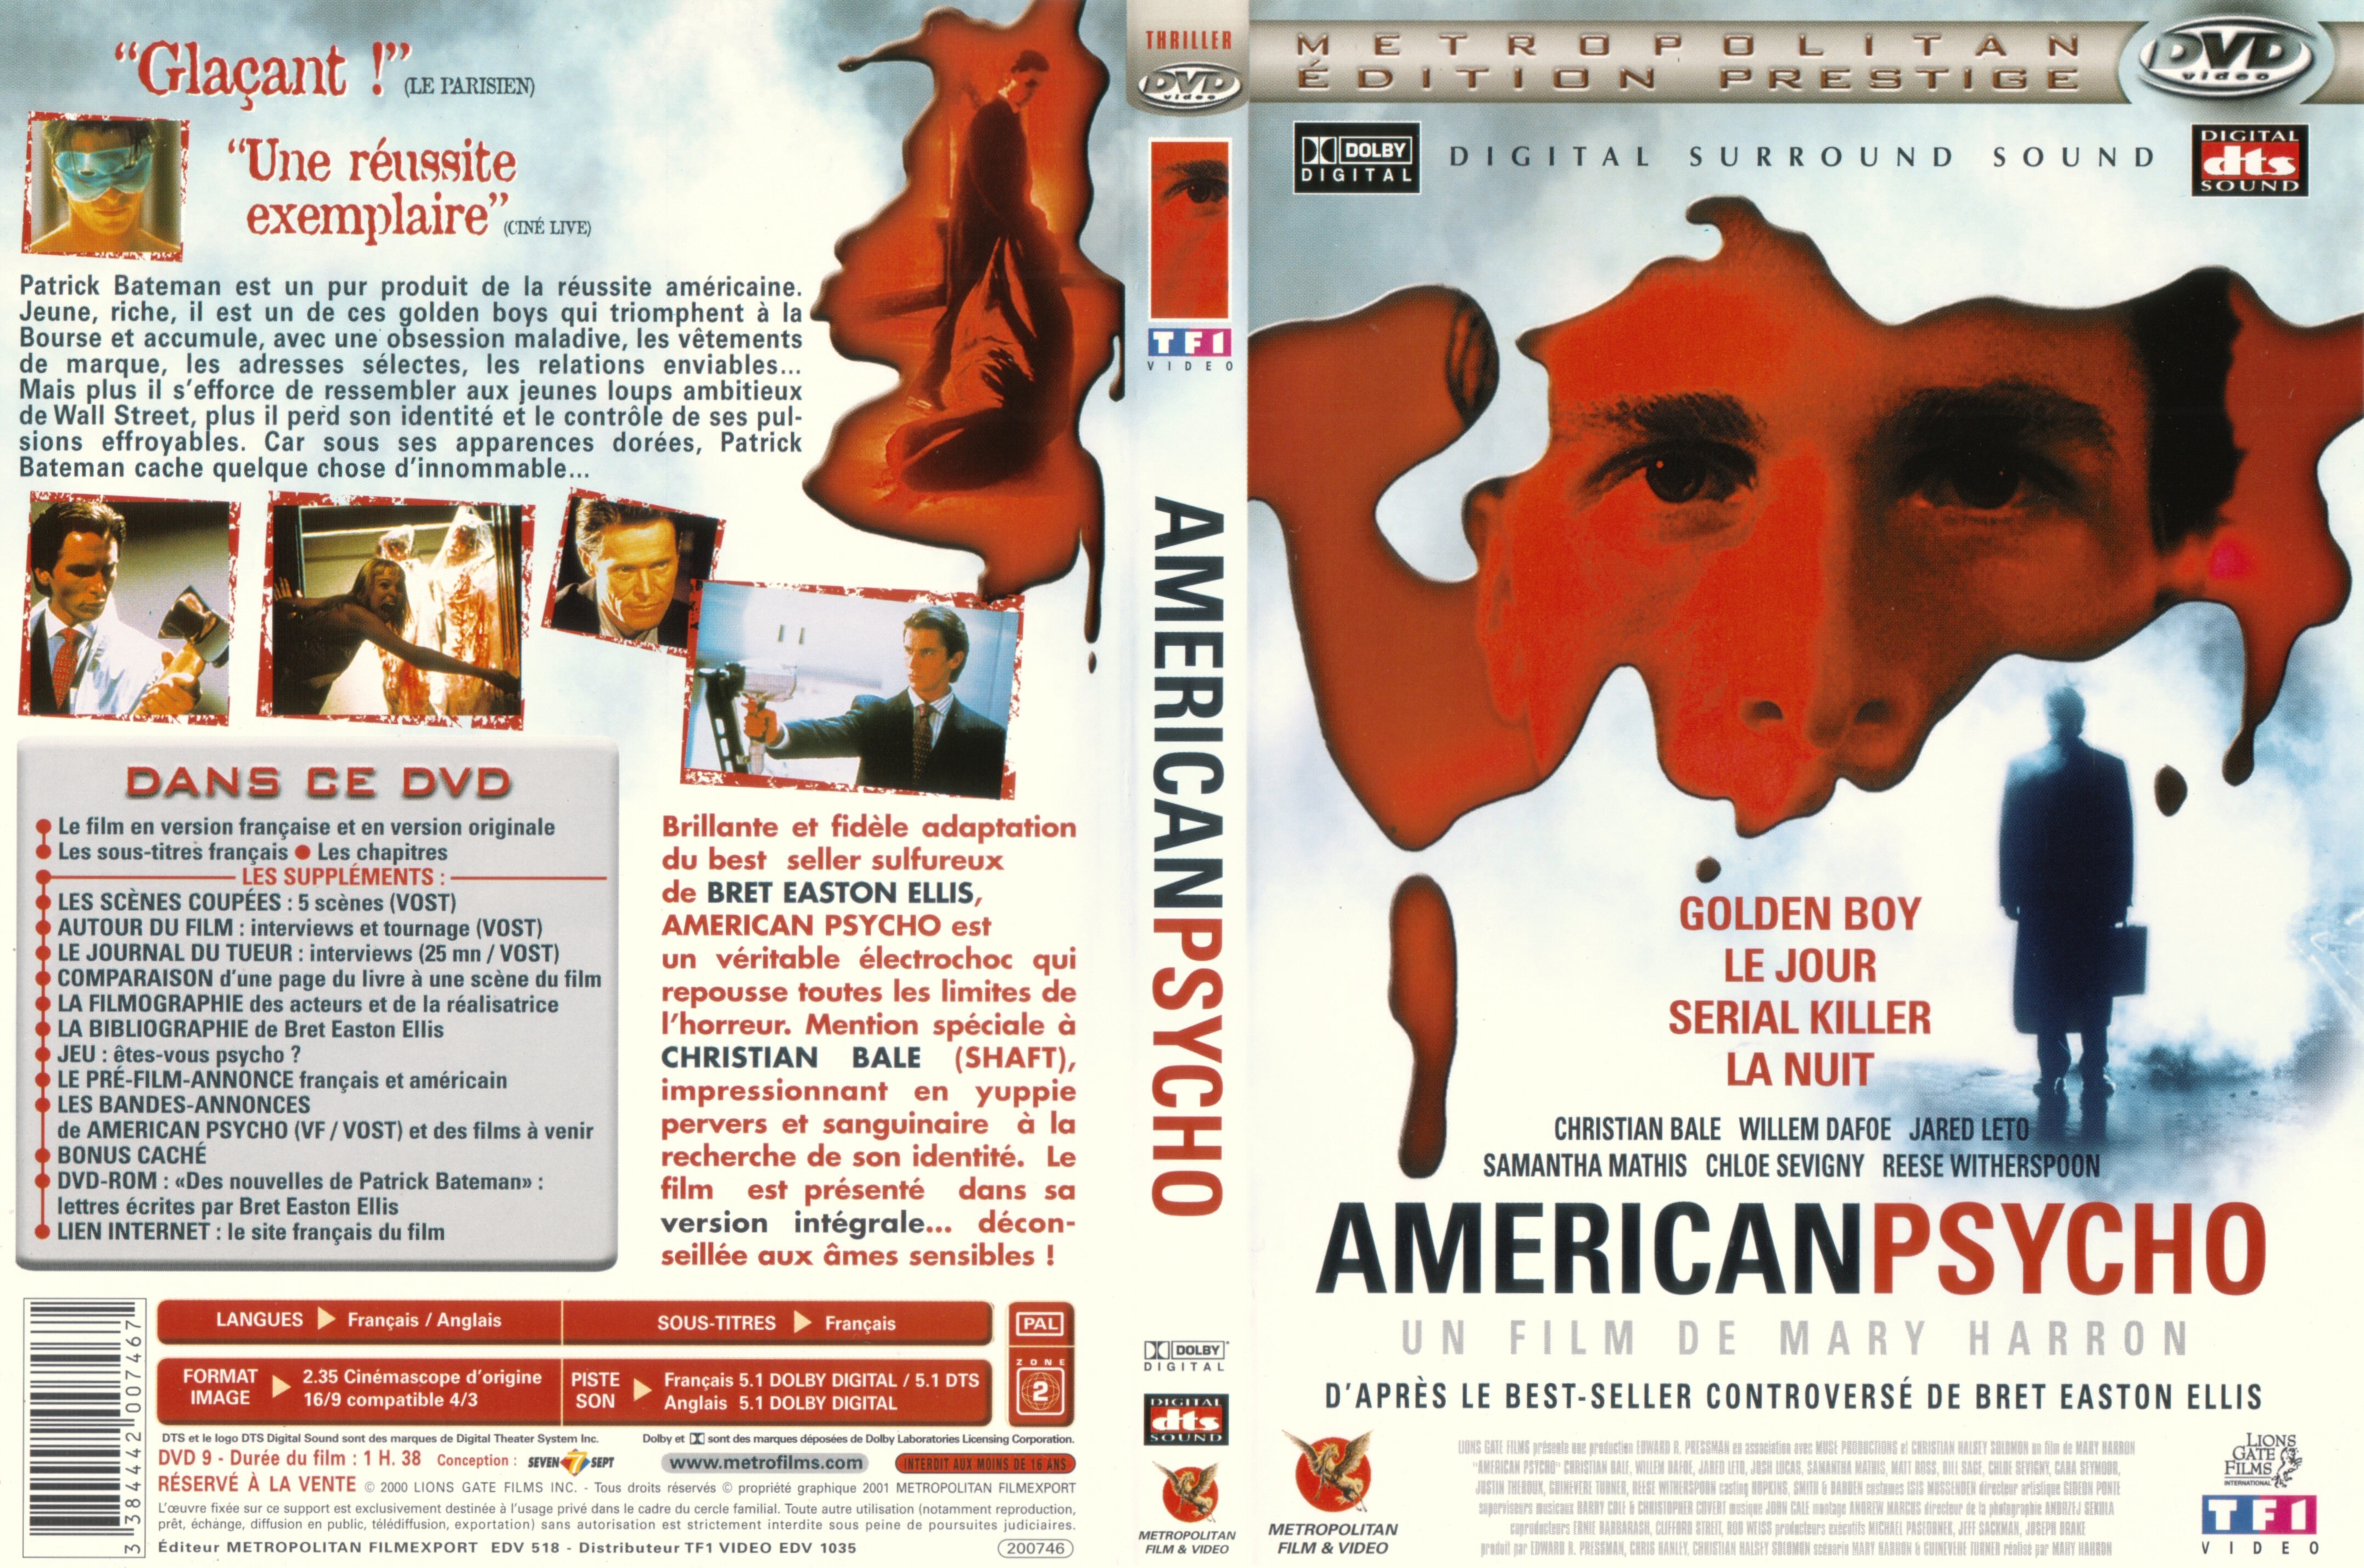 Jaquette DVD American psycho